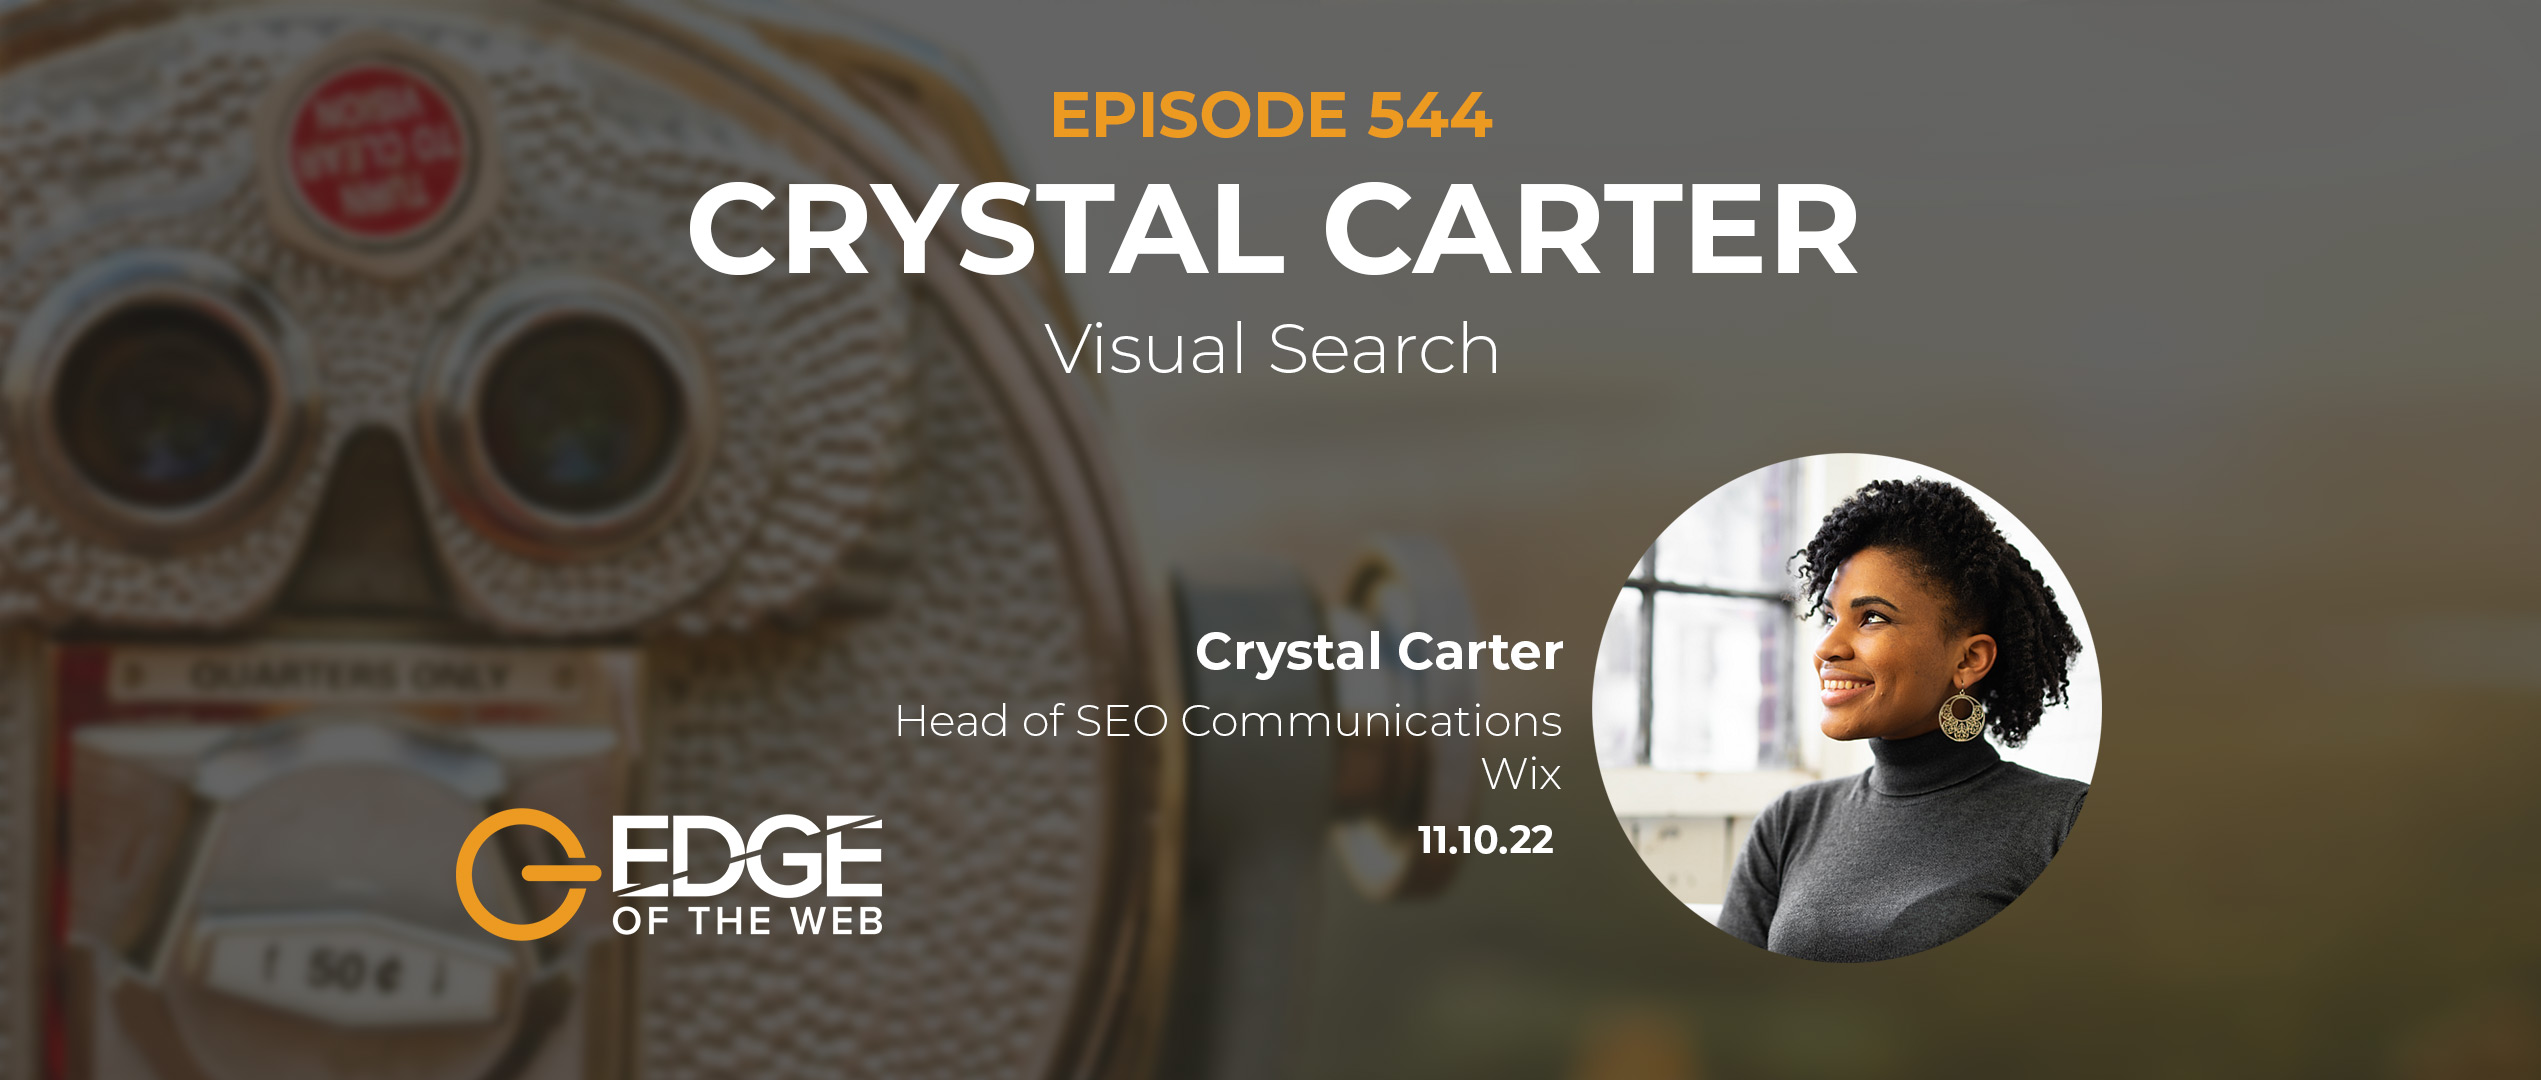 Crystal Carter EDGE Episode 544 Featured Image